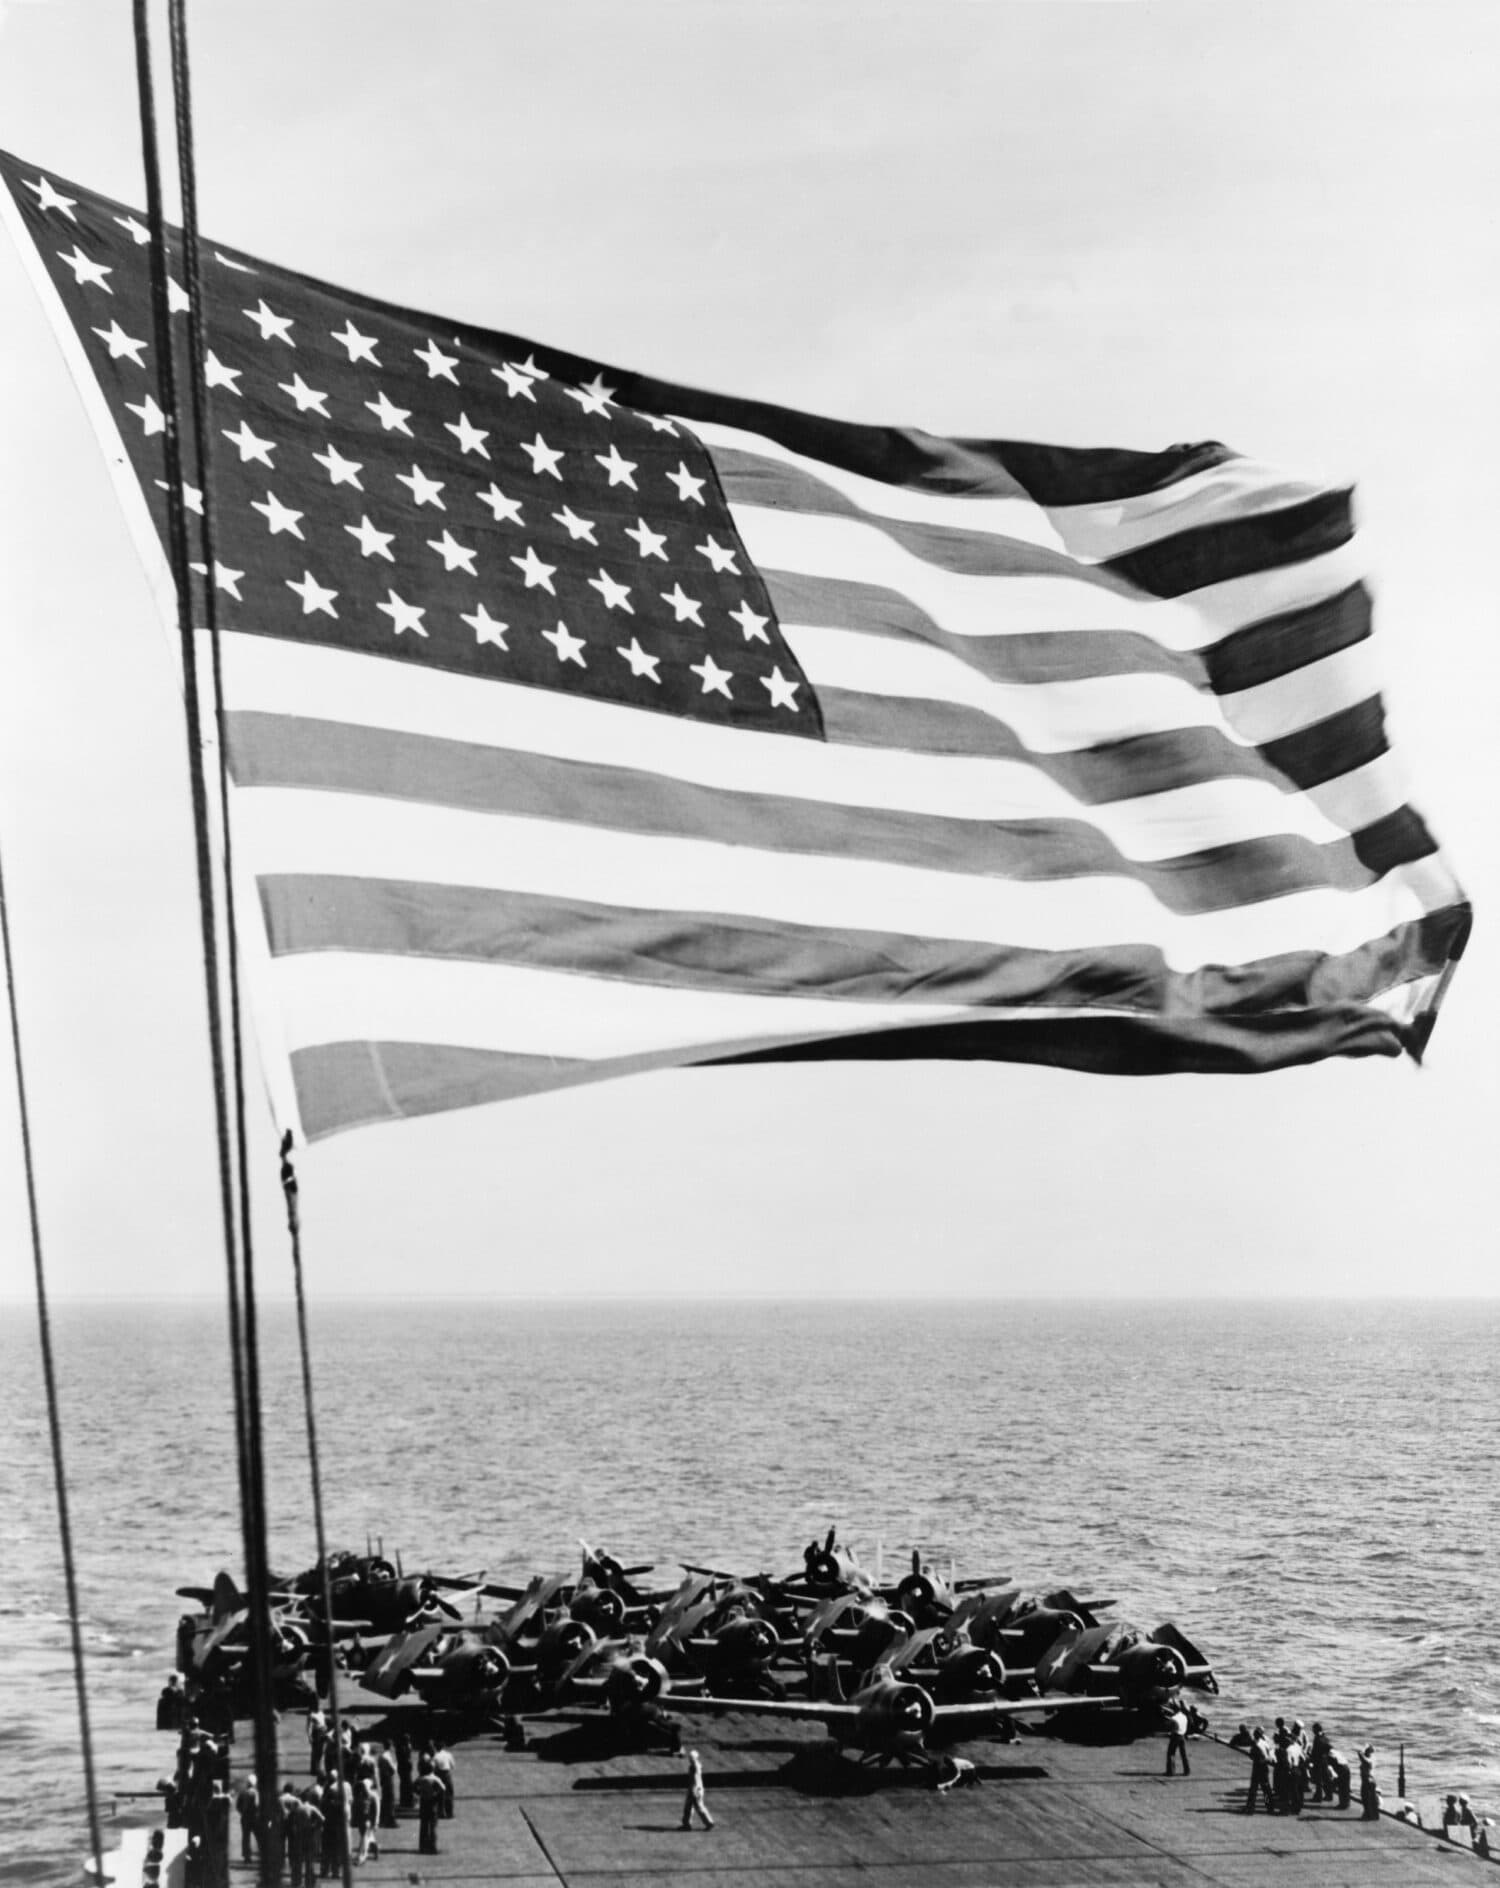 U.S. flag waving in foreground over flight deck of an escort carrier on July 16, 1943. Of the 151 aircraft carriers built in the United States during WWII, 122 were escort carriers.